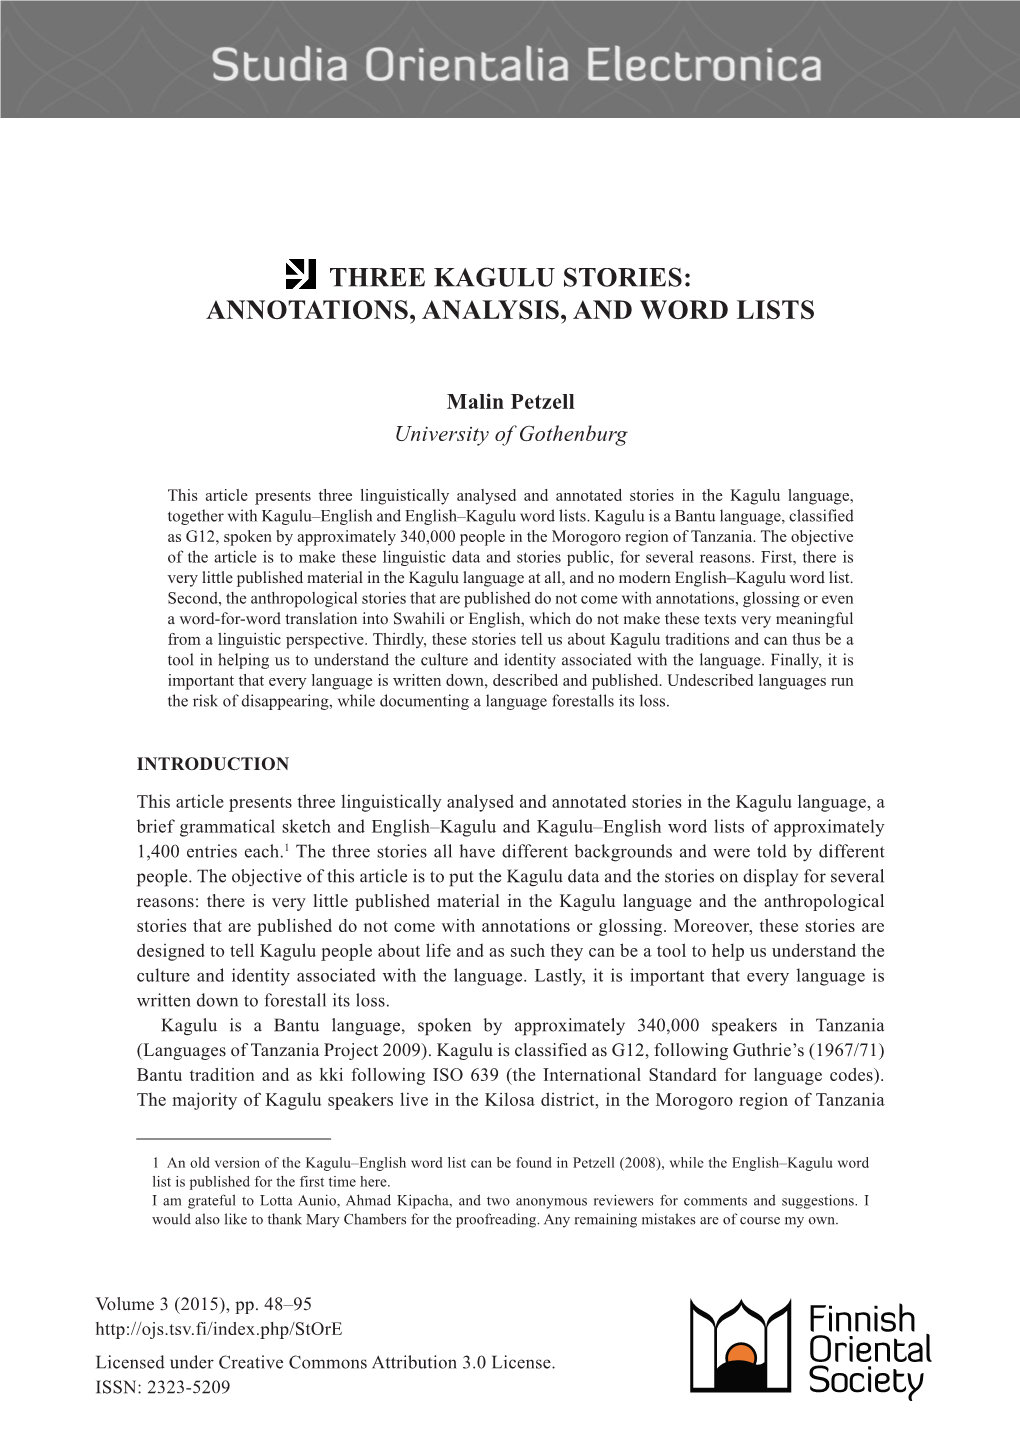 Three Kagulu Stories: Annotations, Analysis, and Word Lists